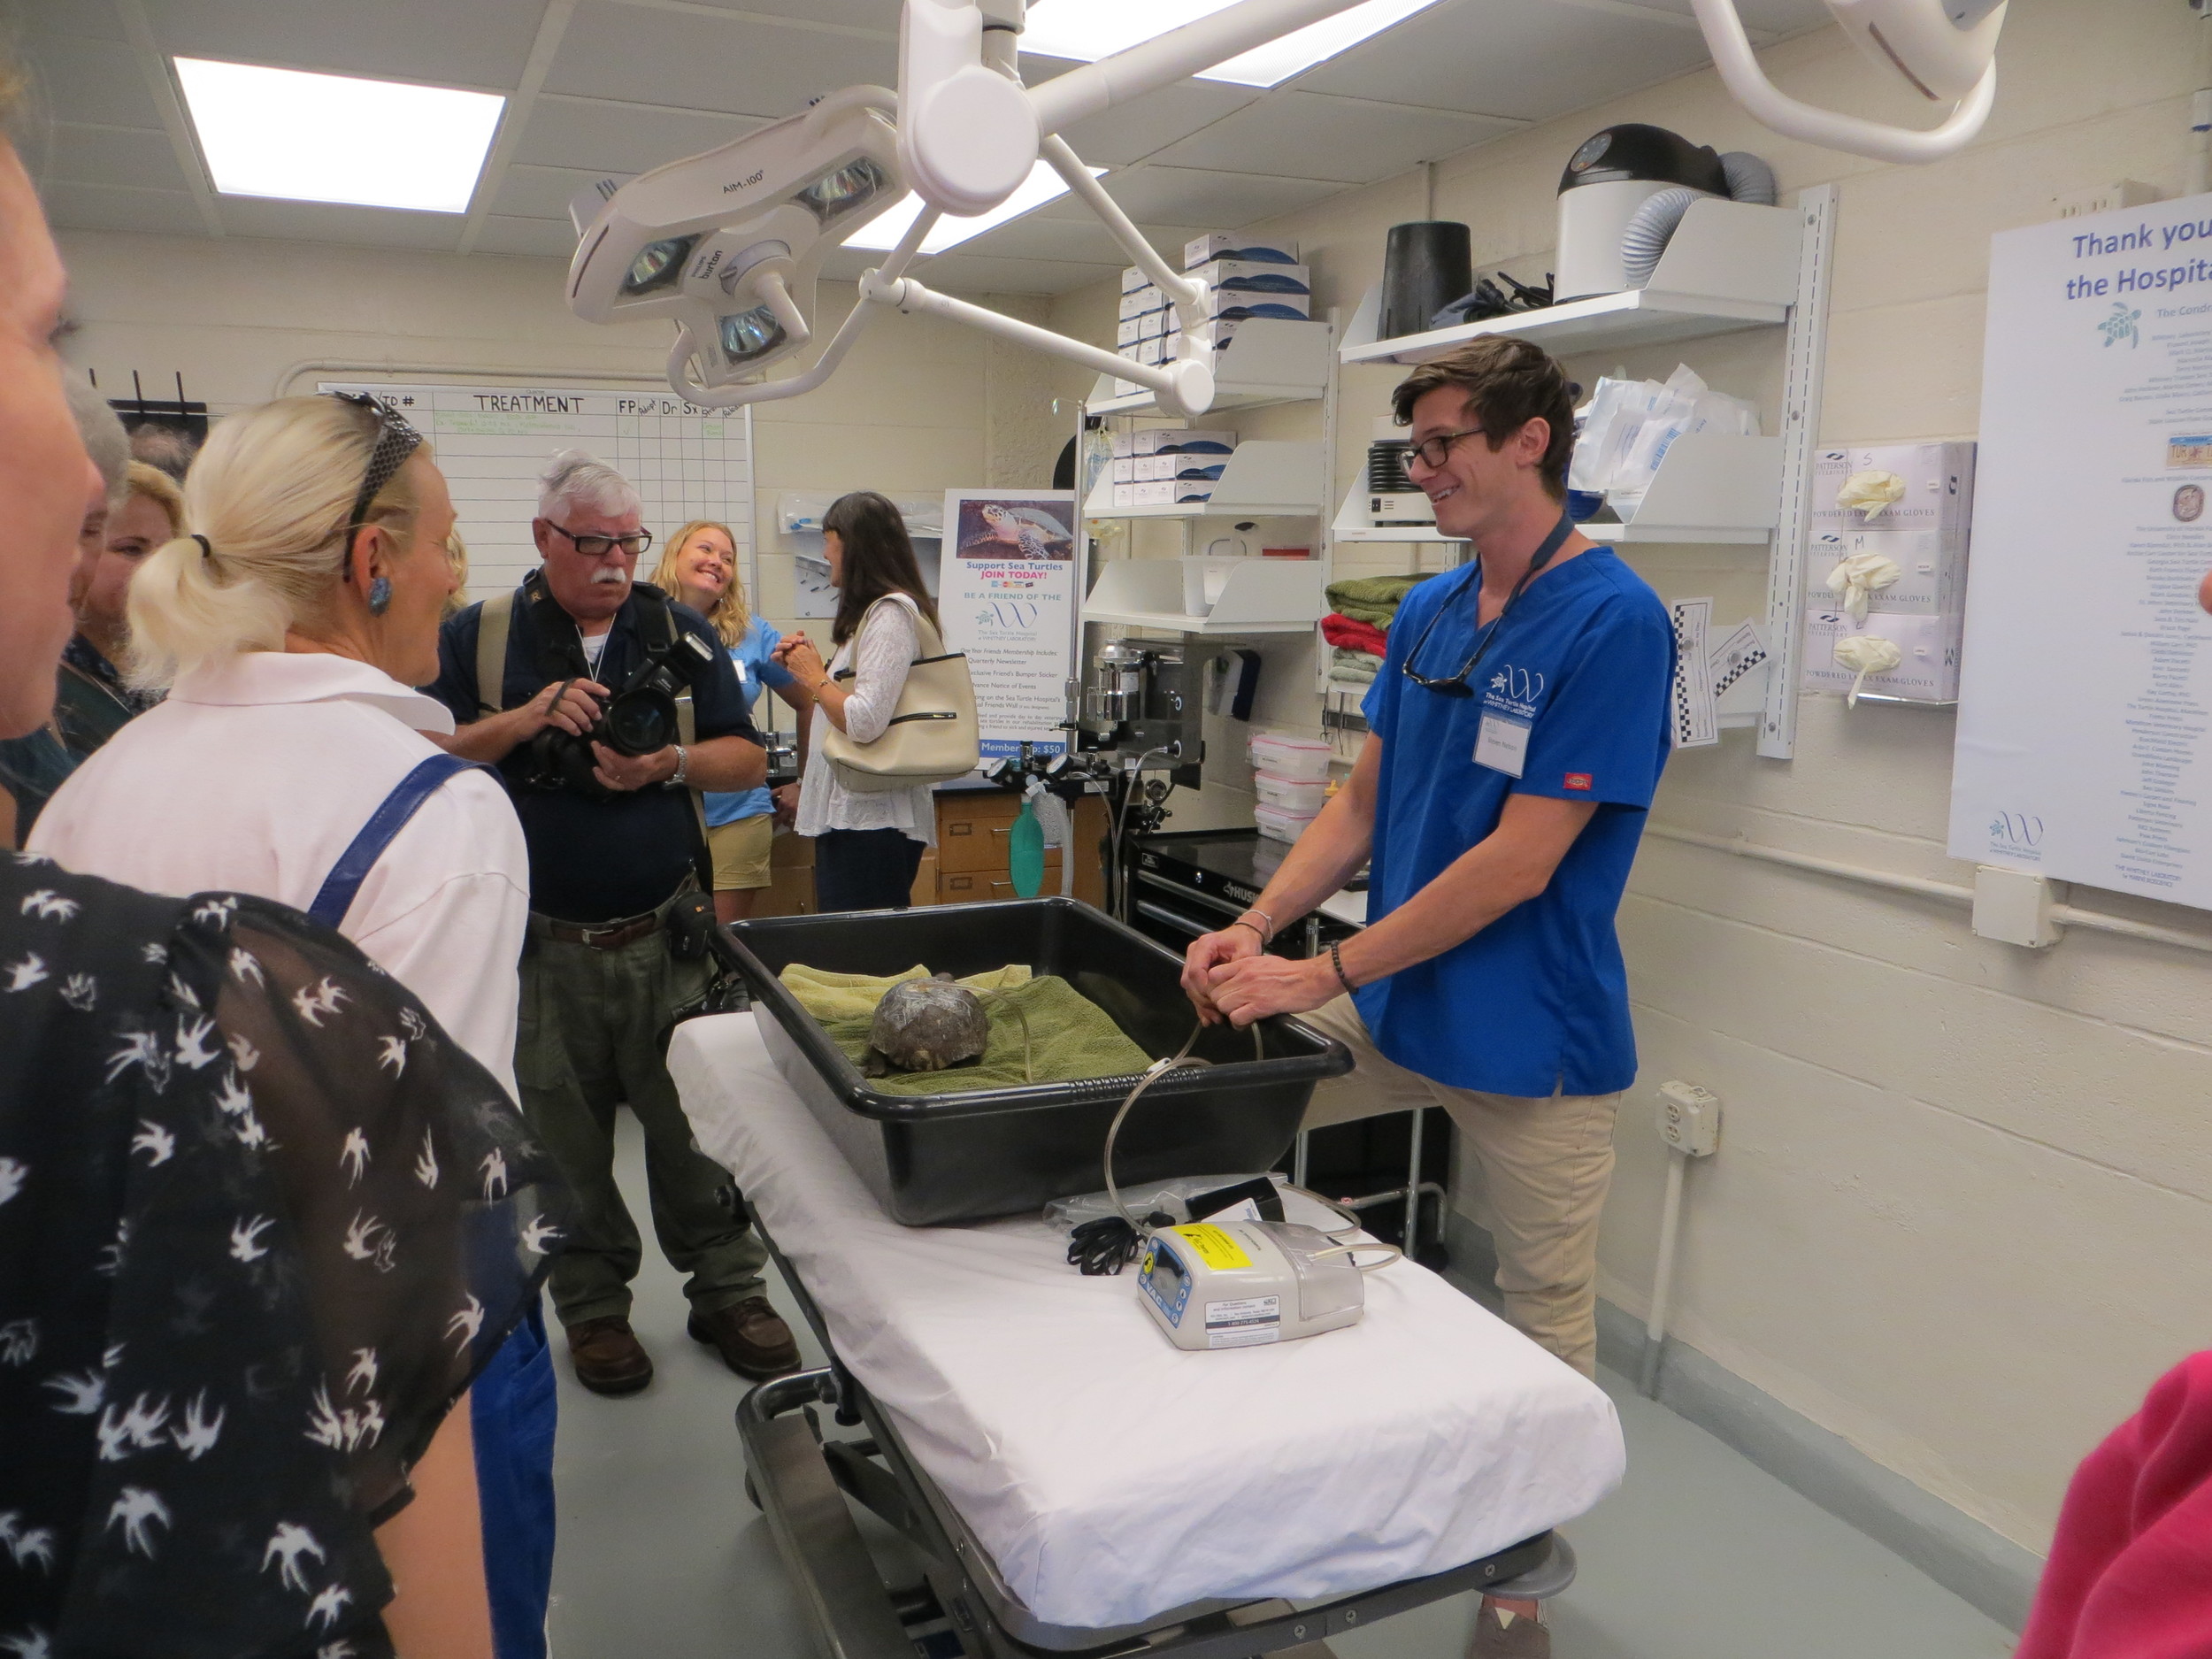 The treatment room: Steven Nelson, certified veterinary technician at the sea turtle hospital, answers visitors’ questions during the grand opening celebration.